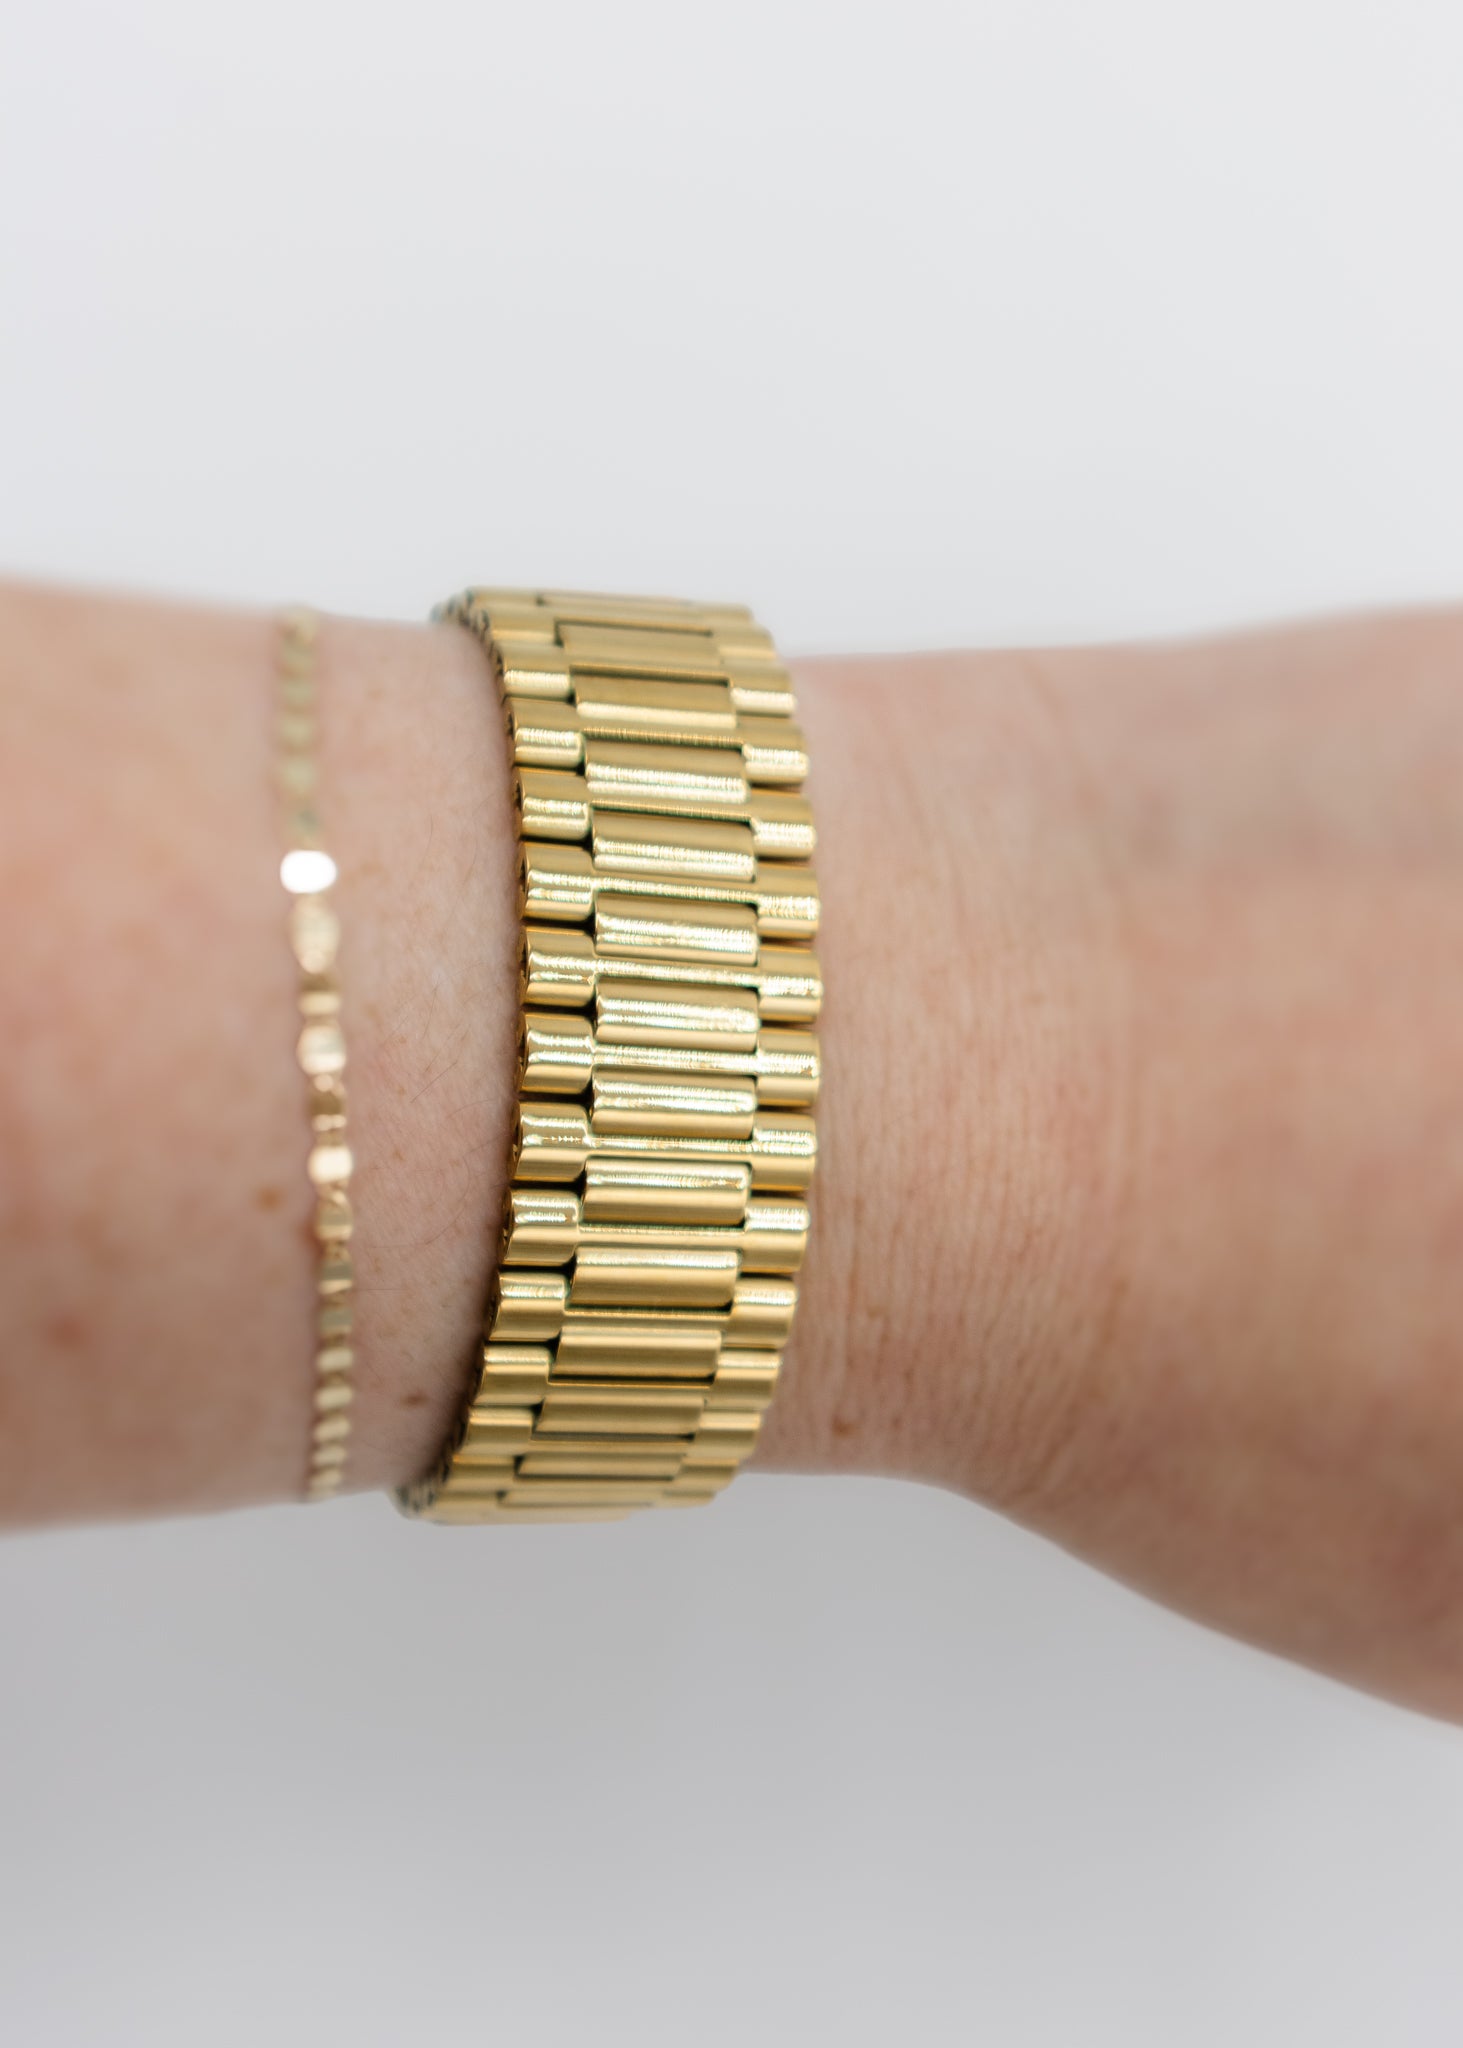 The Gold Thick Watch Band Bracelet